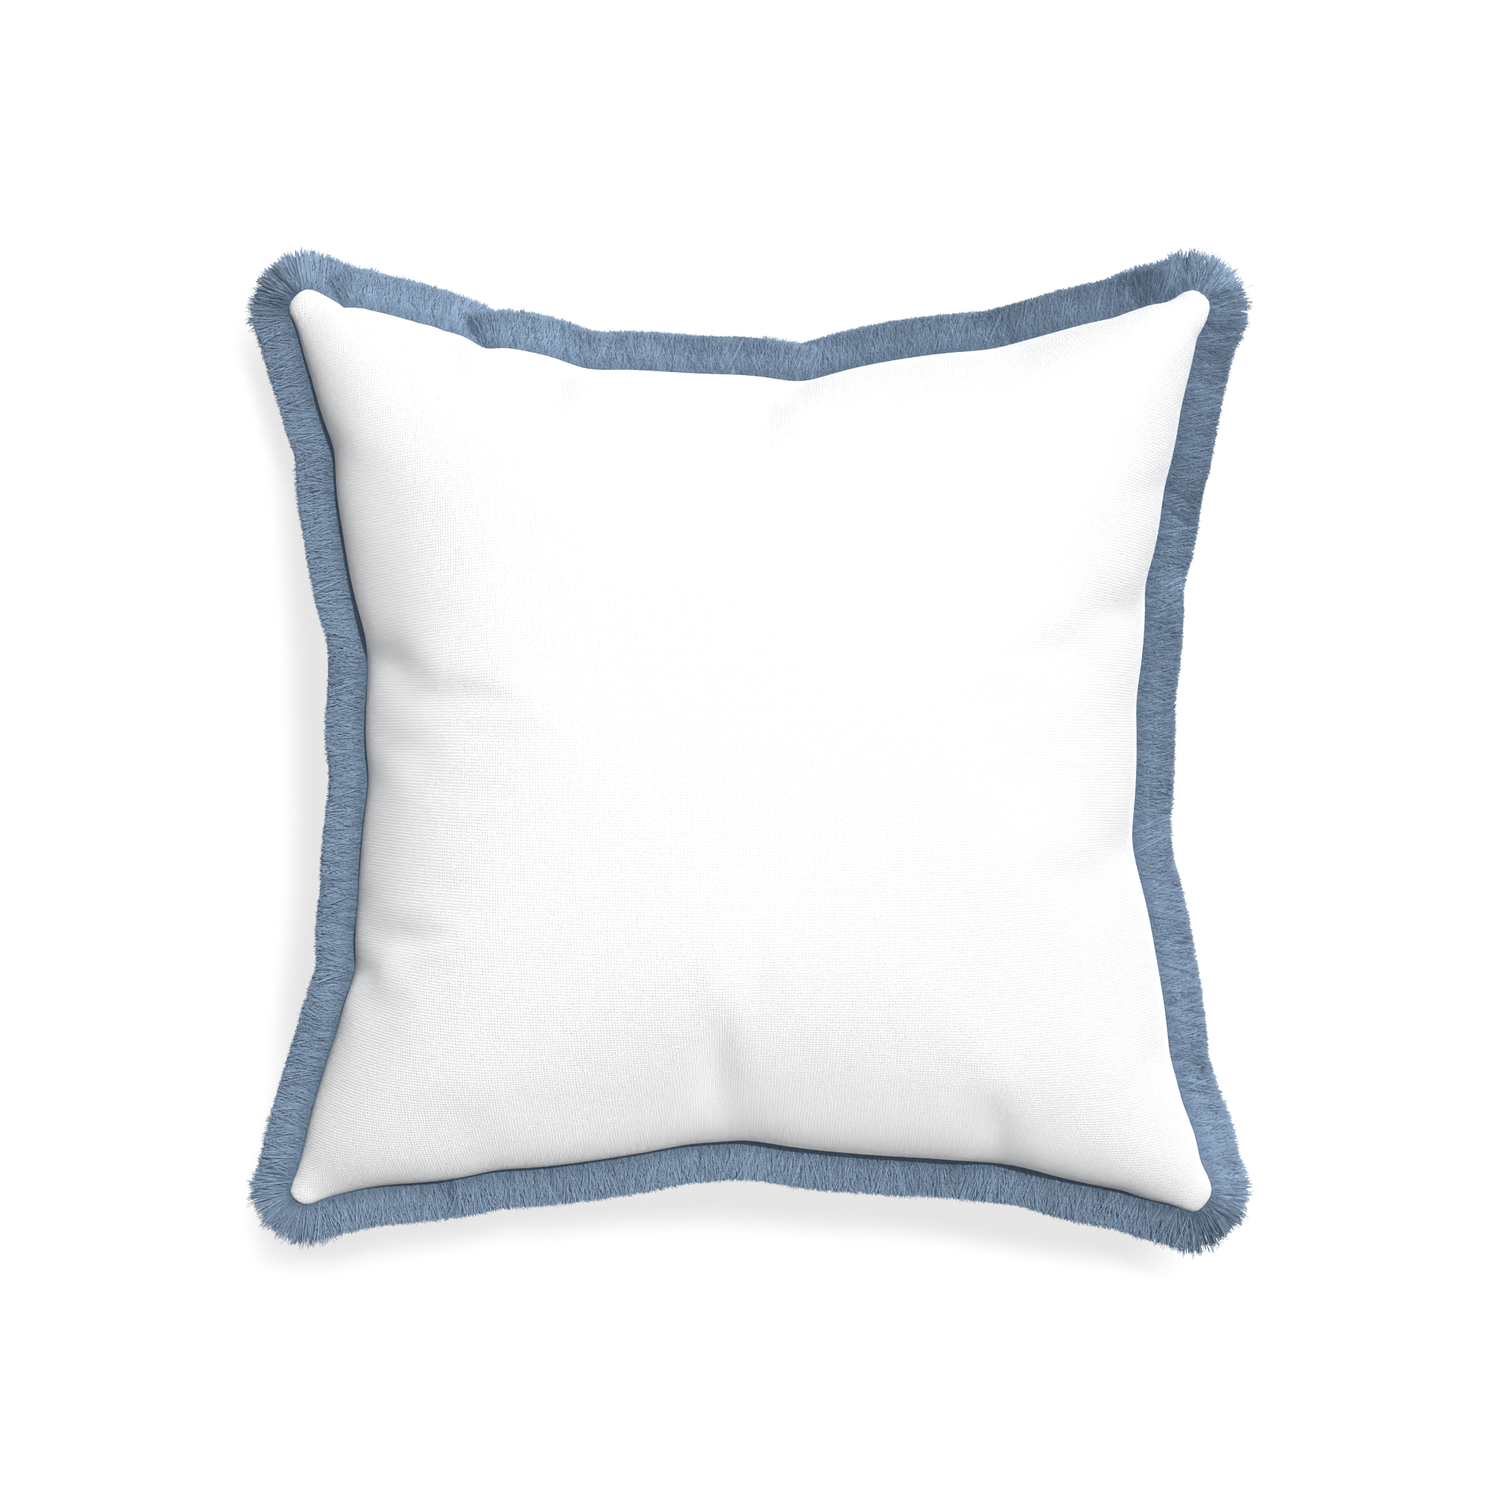 20-square snow custom white cottonpillow with sky fringe on white background